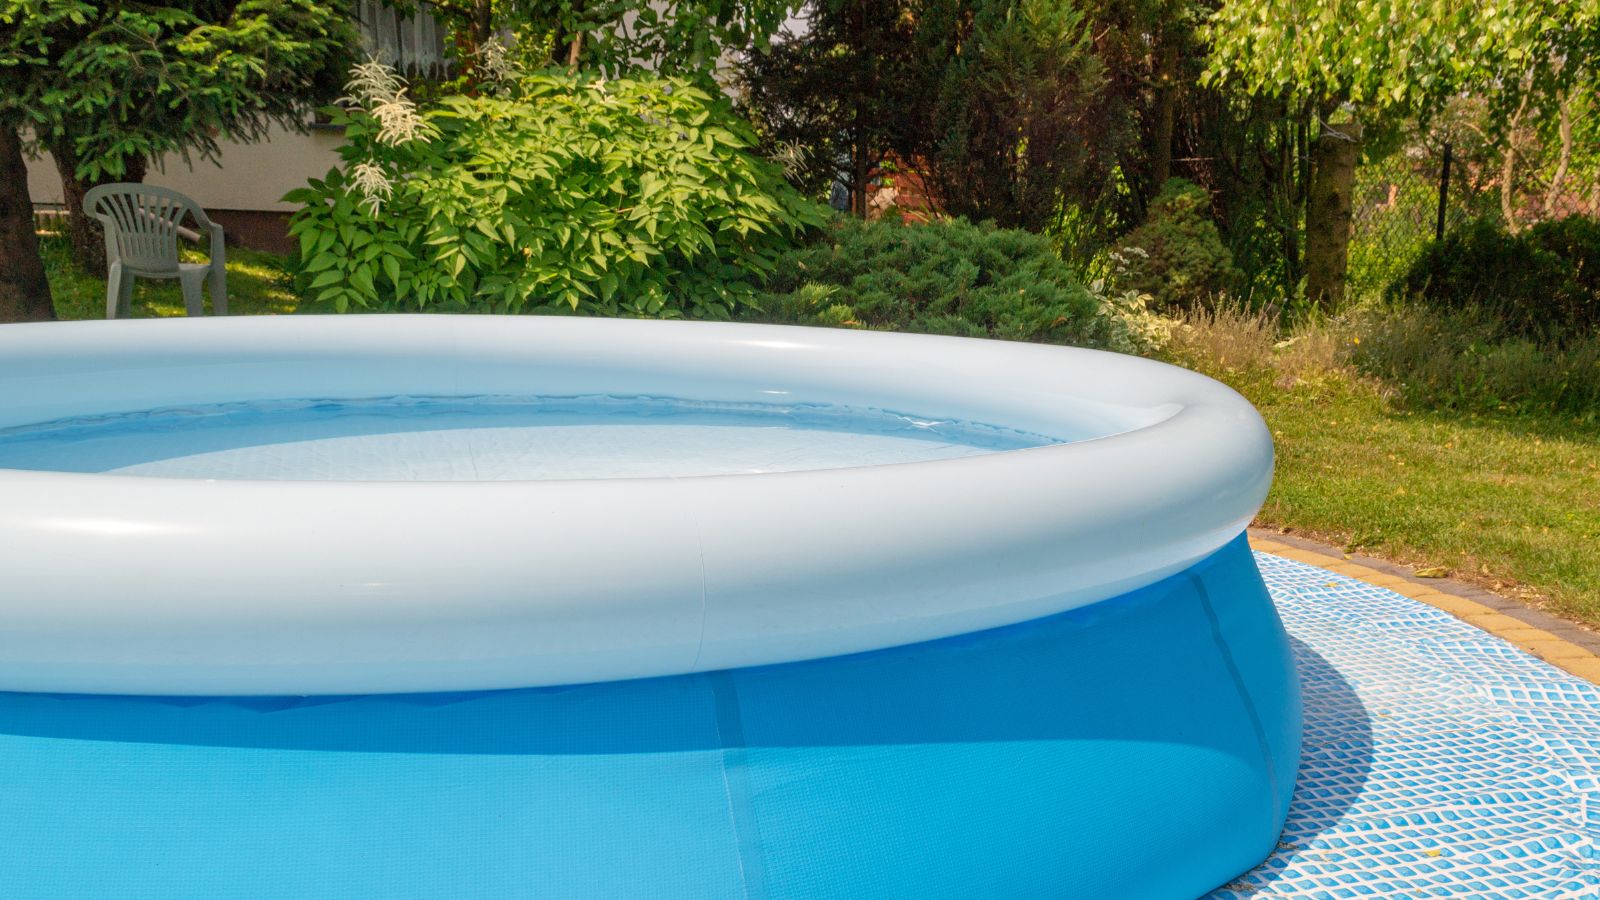 How to keep an inflatable pool clean: according to pool pros